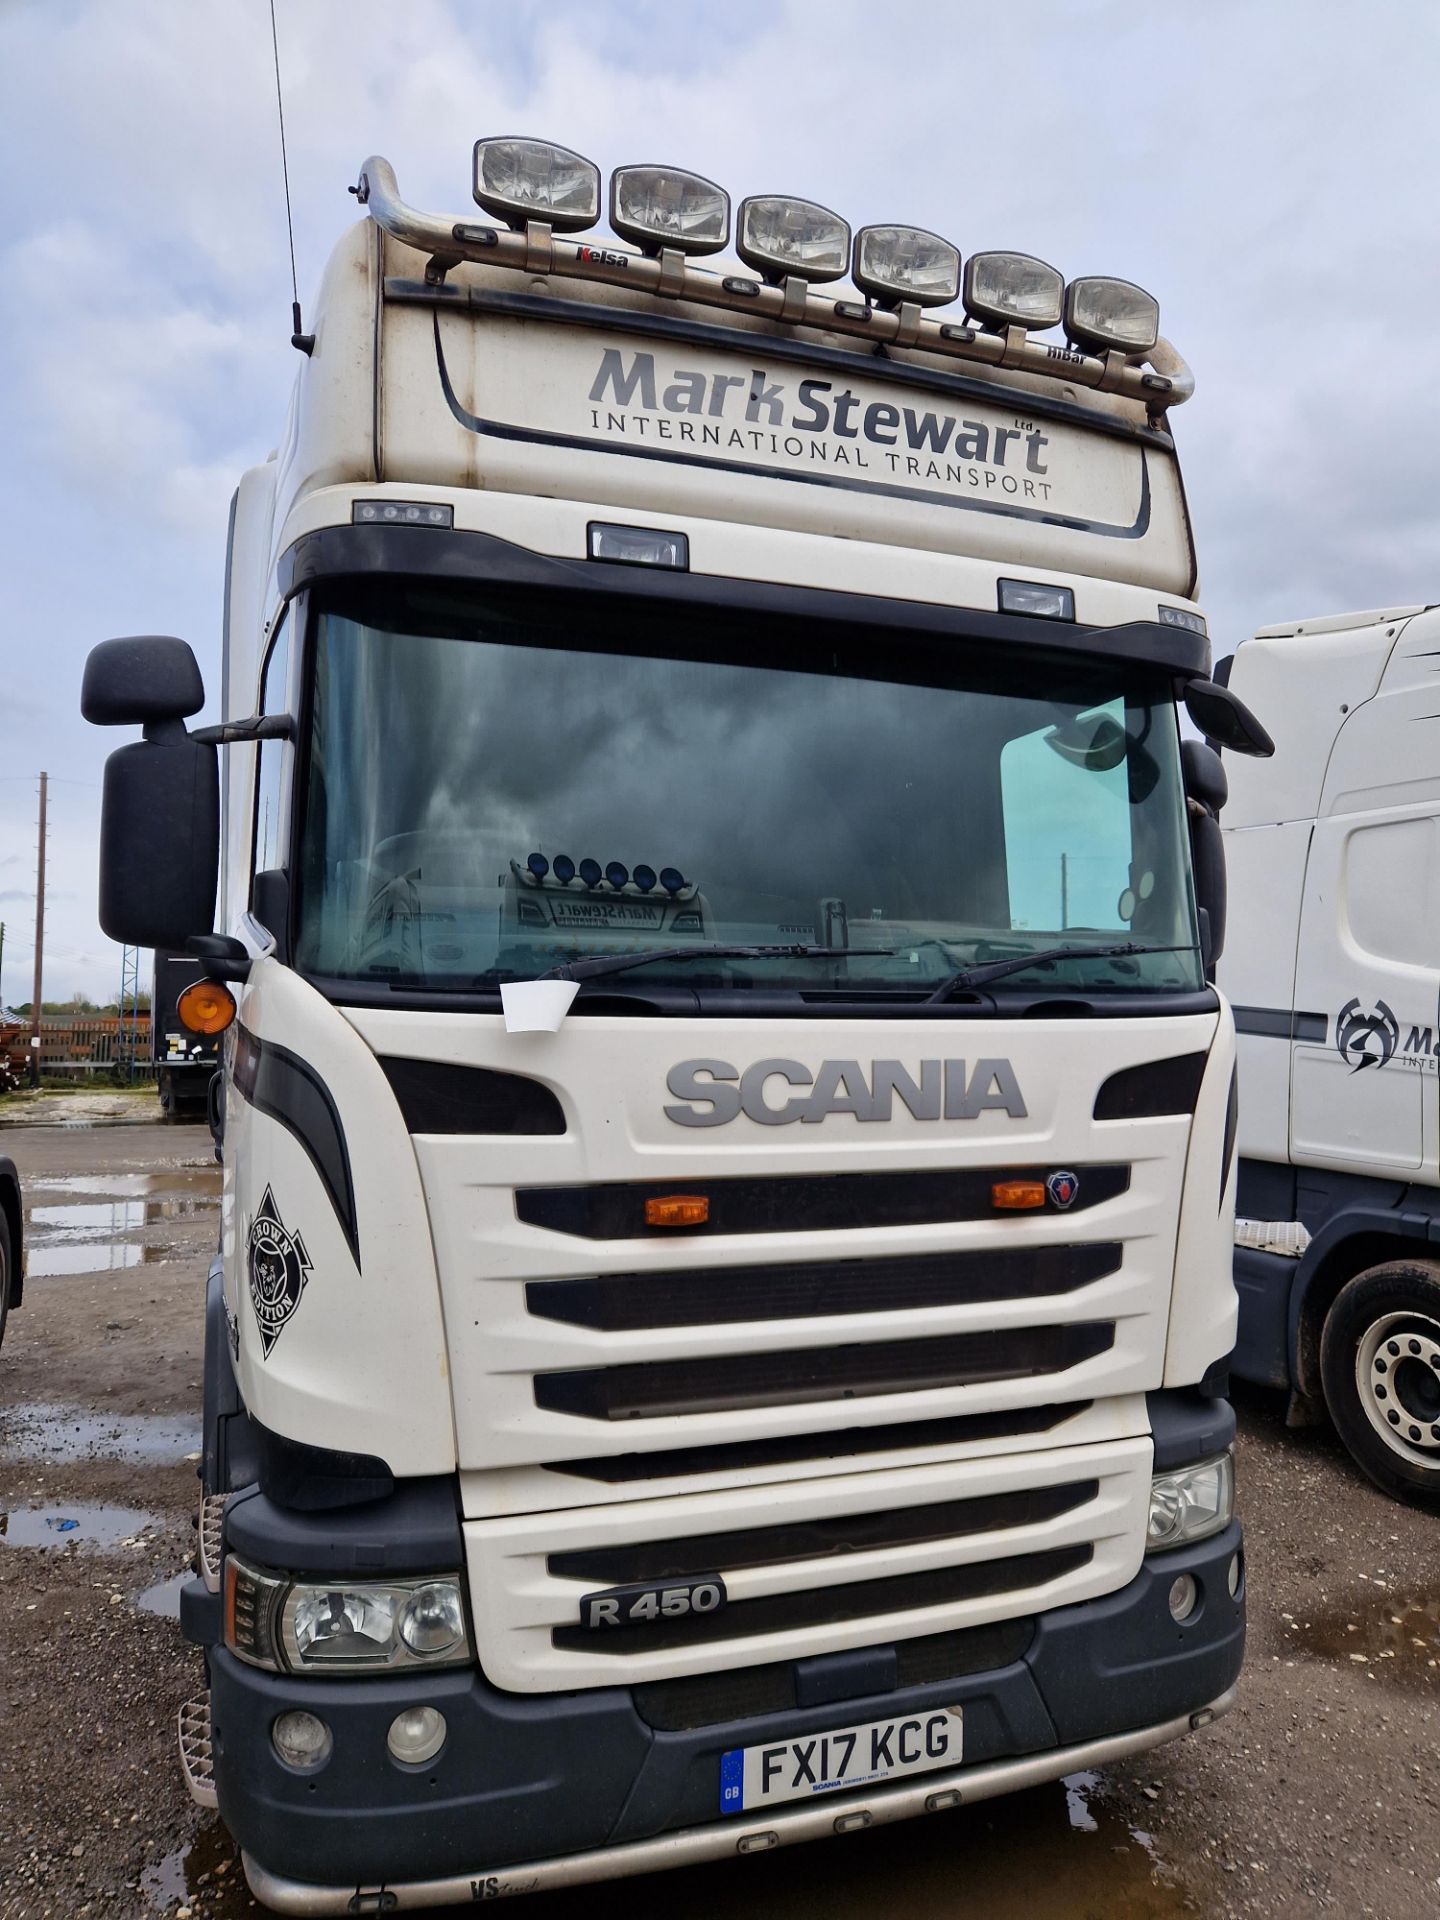 Scania R450 Topline 44T 6x2 Tractor Unit with Fridge Freezer, Top Bar and Spot Lights, - Image 6 of 9